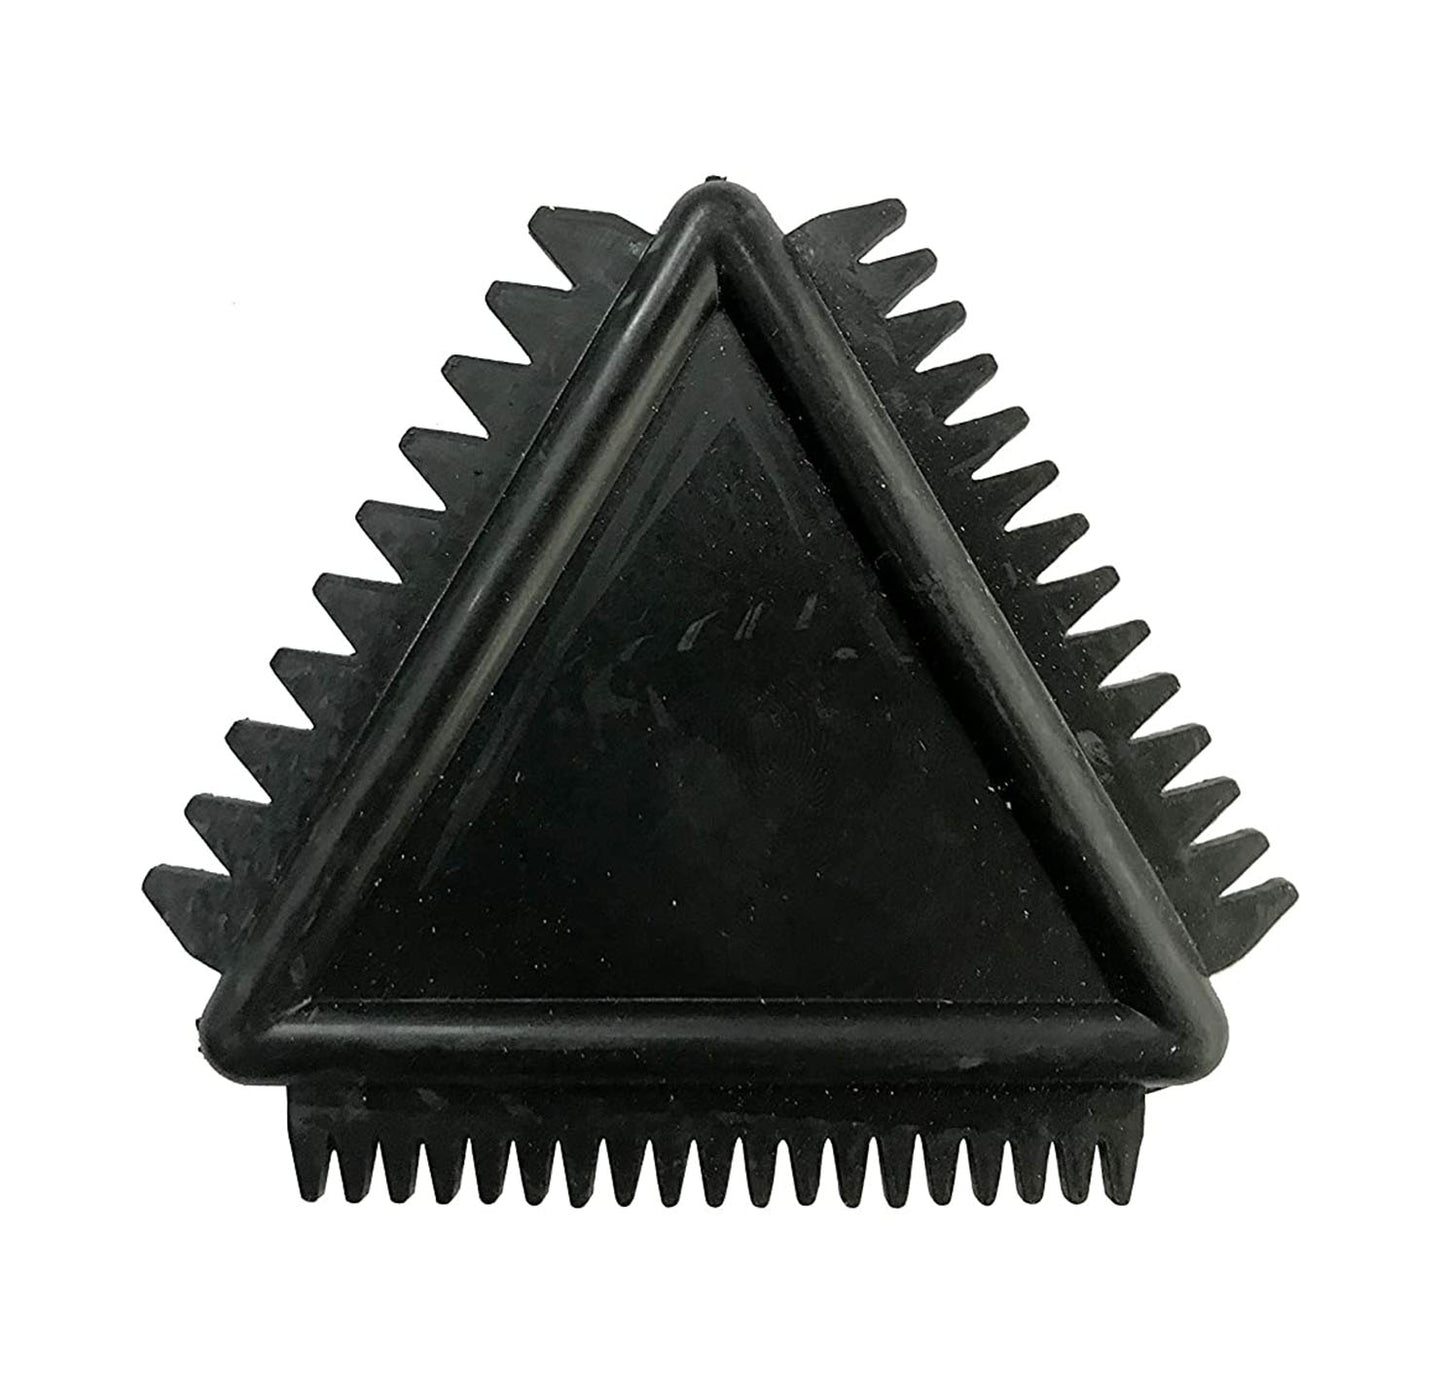 Asian Paints Royale Play Comb Tool